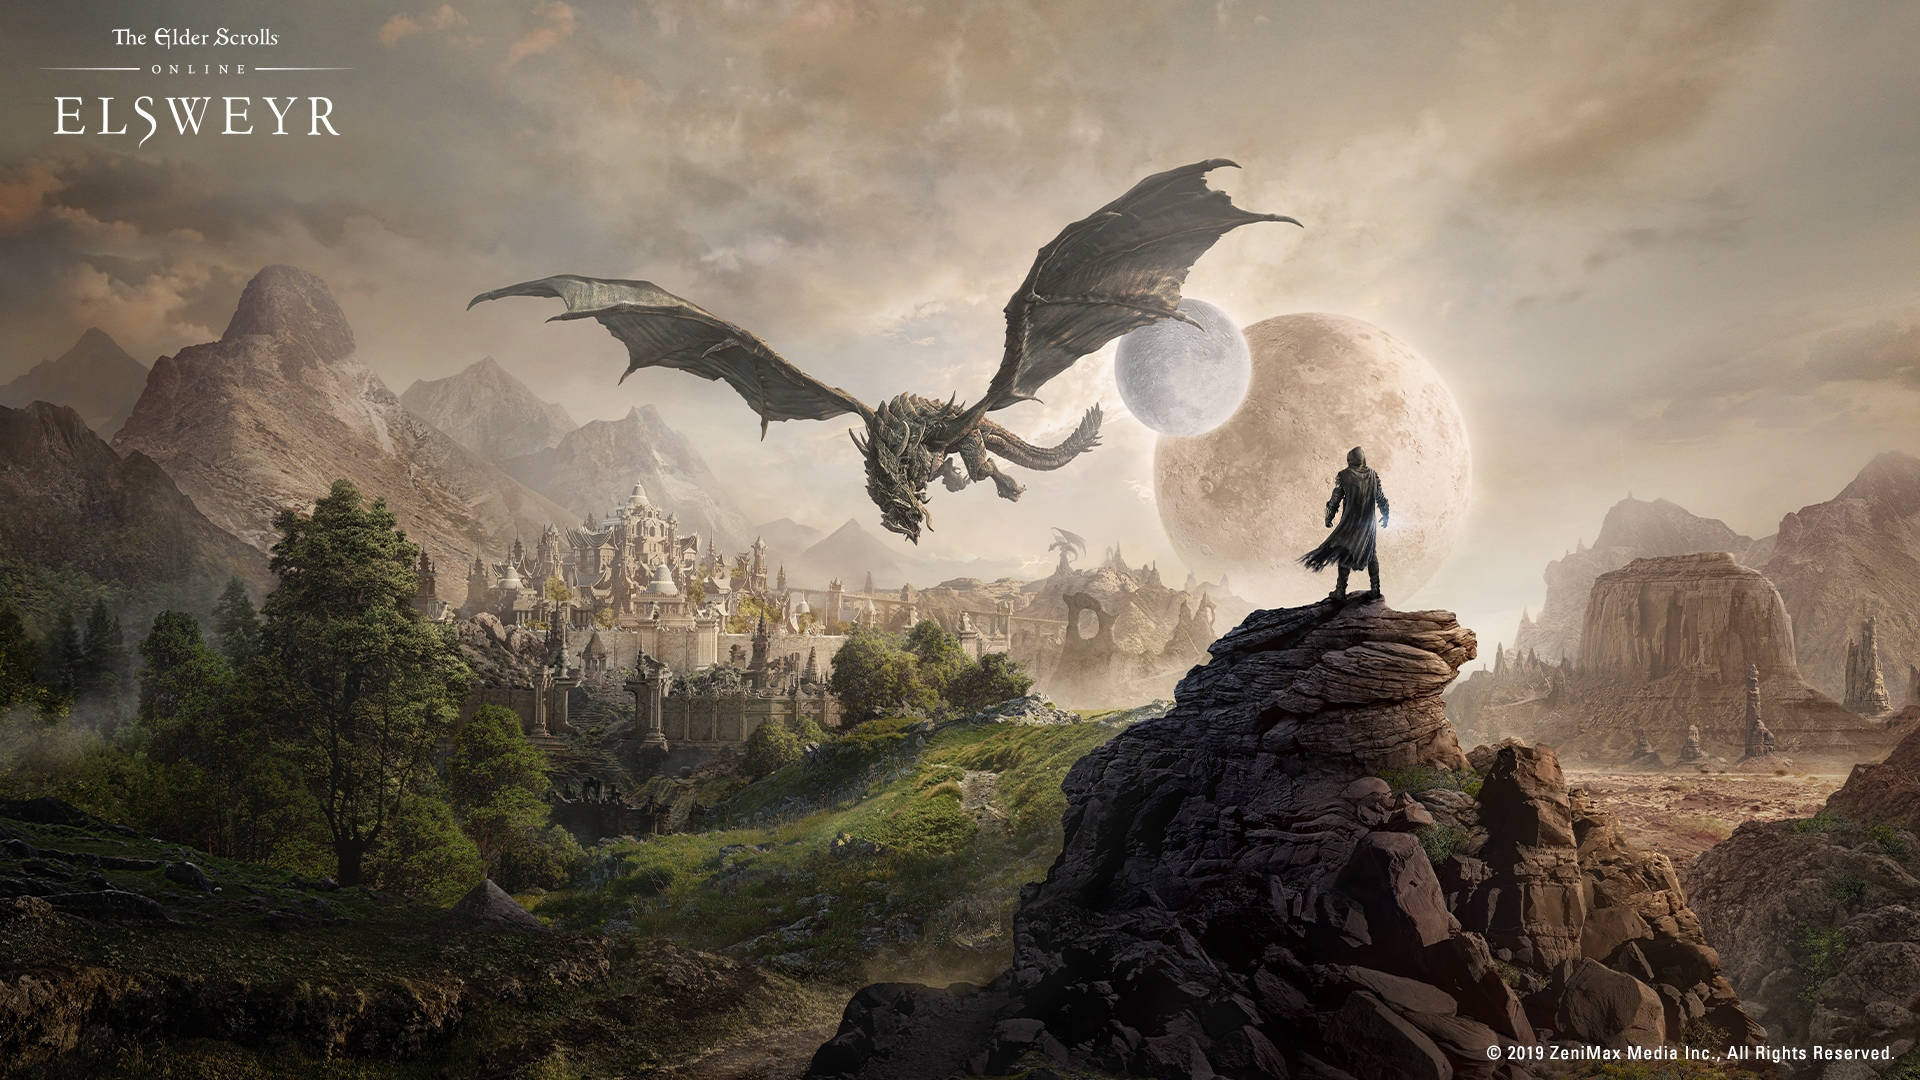 A dragon looms in this wallpaper for The Elder Scrolls Online: Elsweyr.